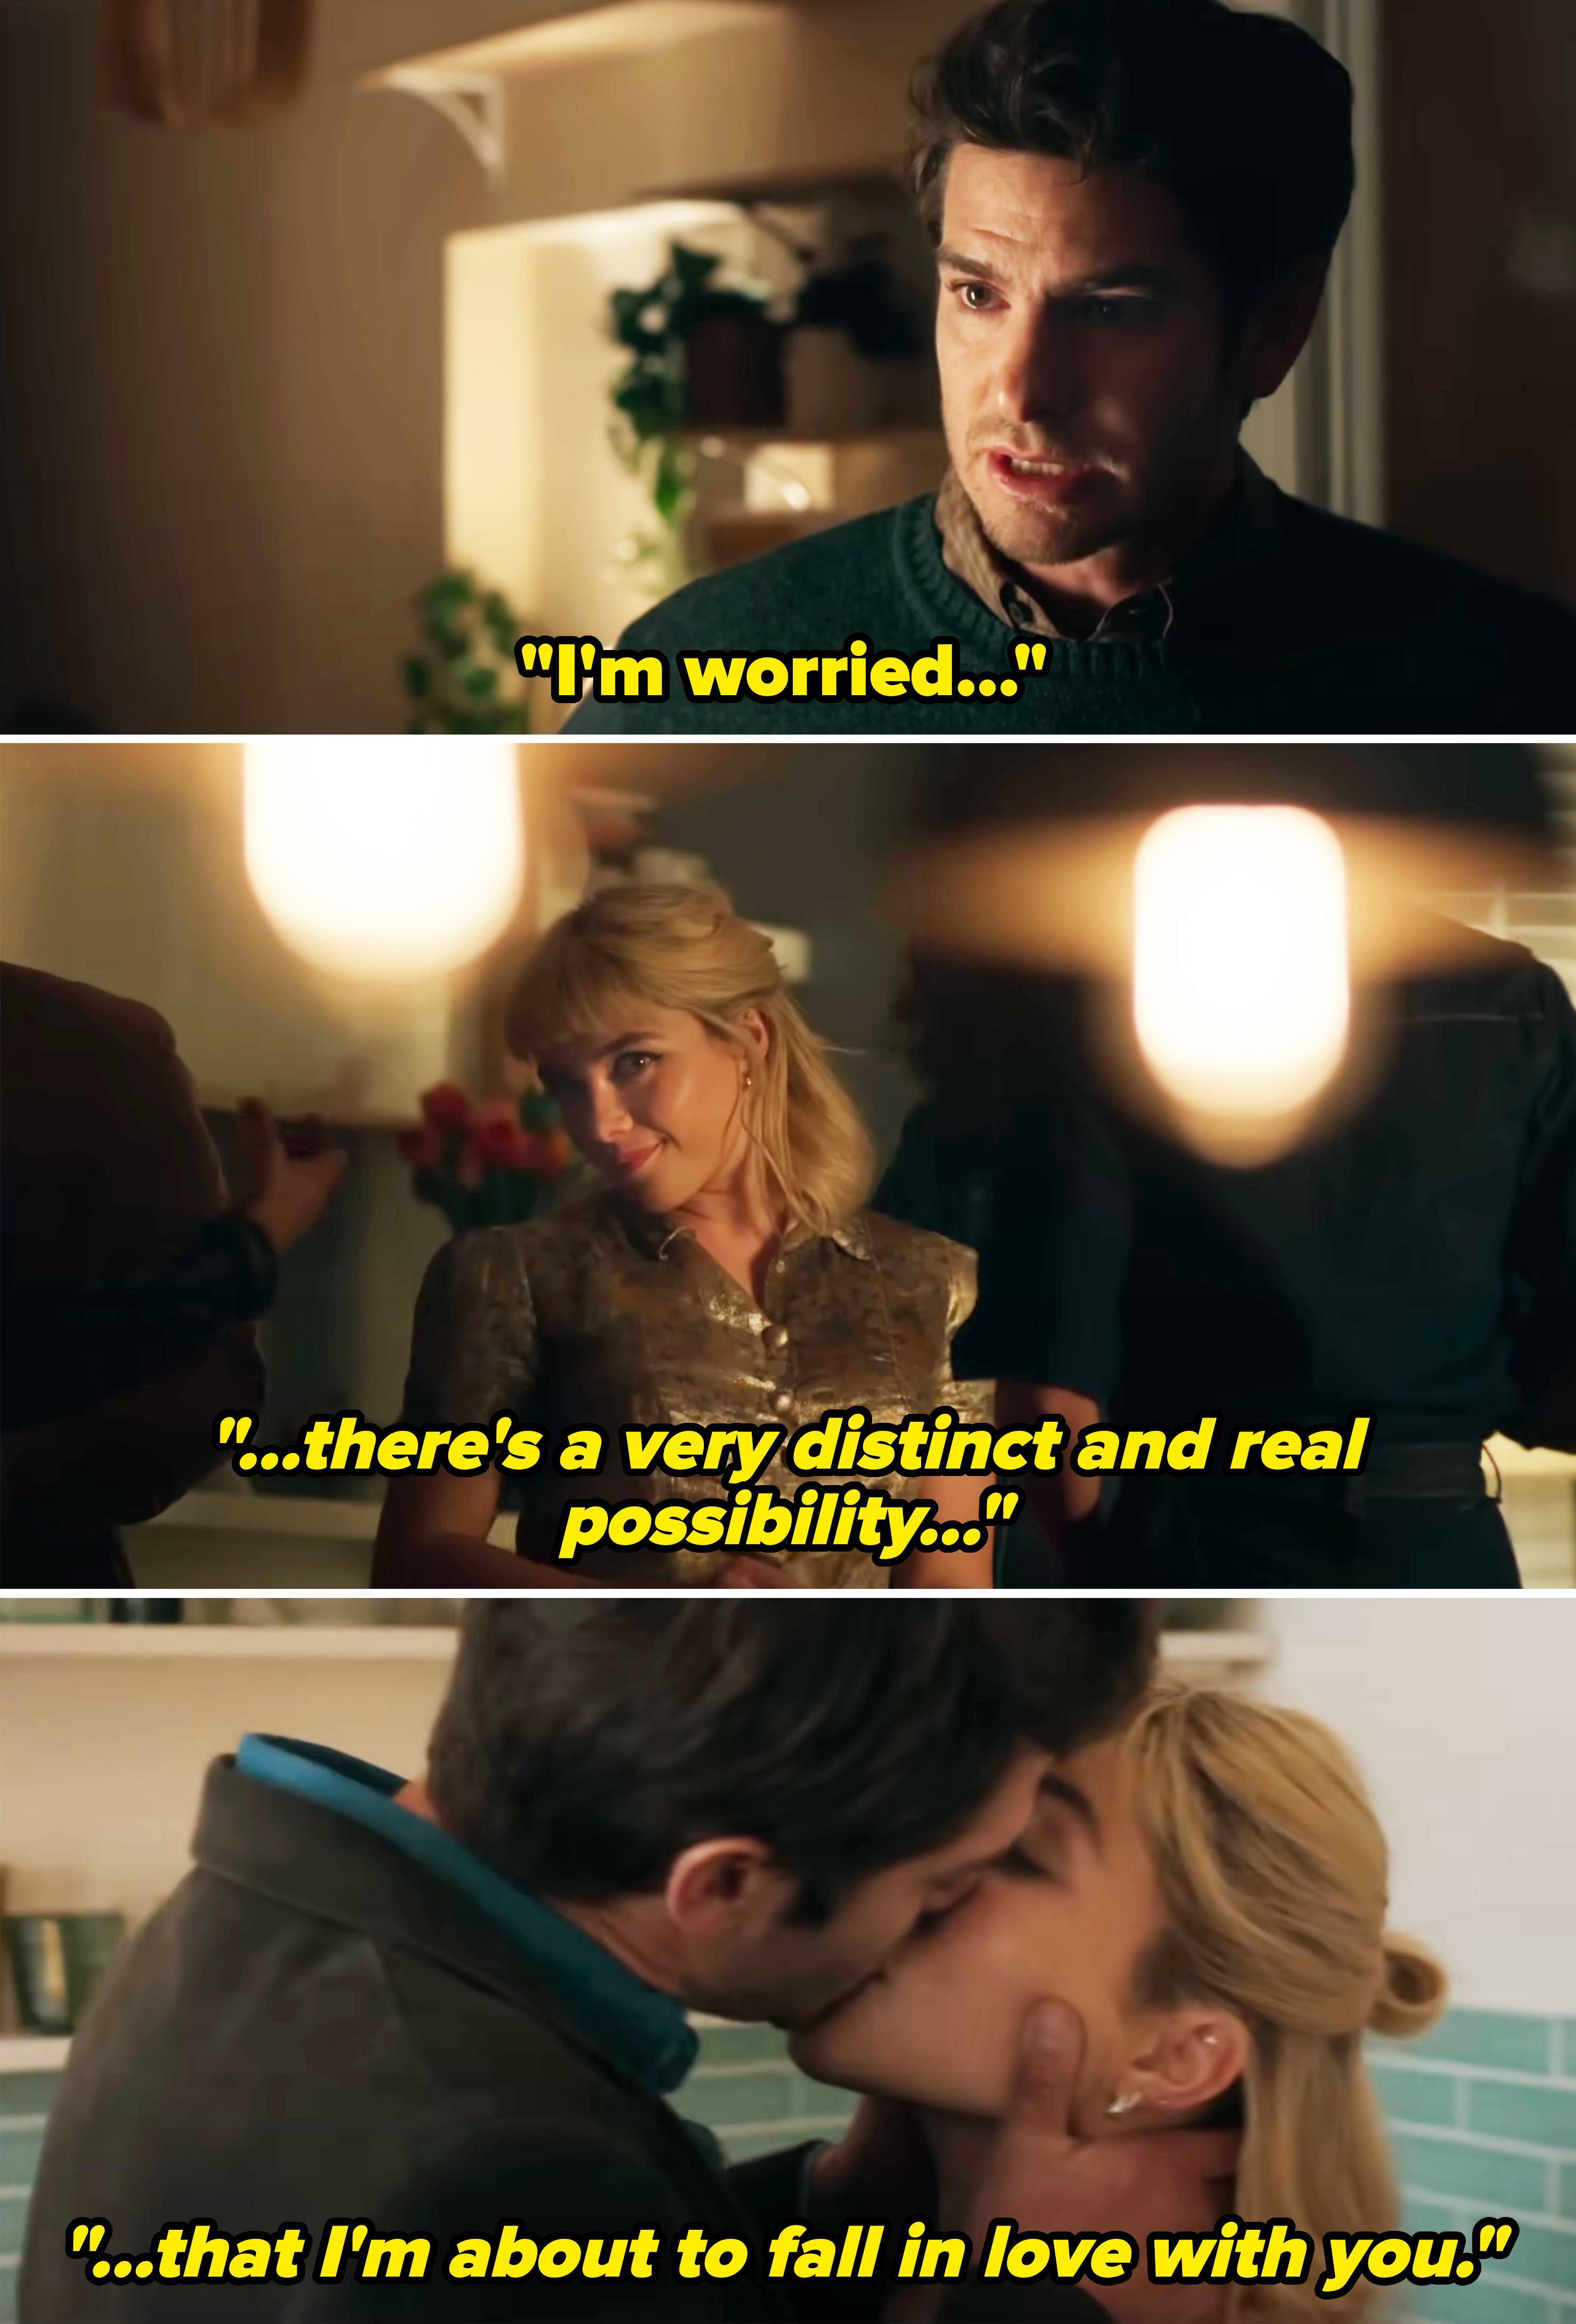 Three scenes with Florence Pugh and Andrew Garfield from a TV show or movie: a conversation in a kitchen, Florence smirking at a party, and Florence and Andrew sharing a kiss